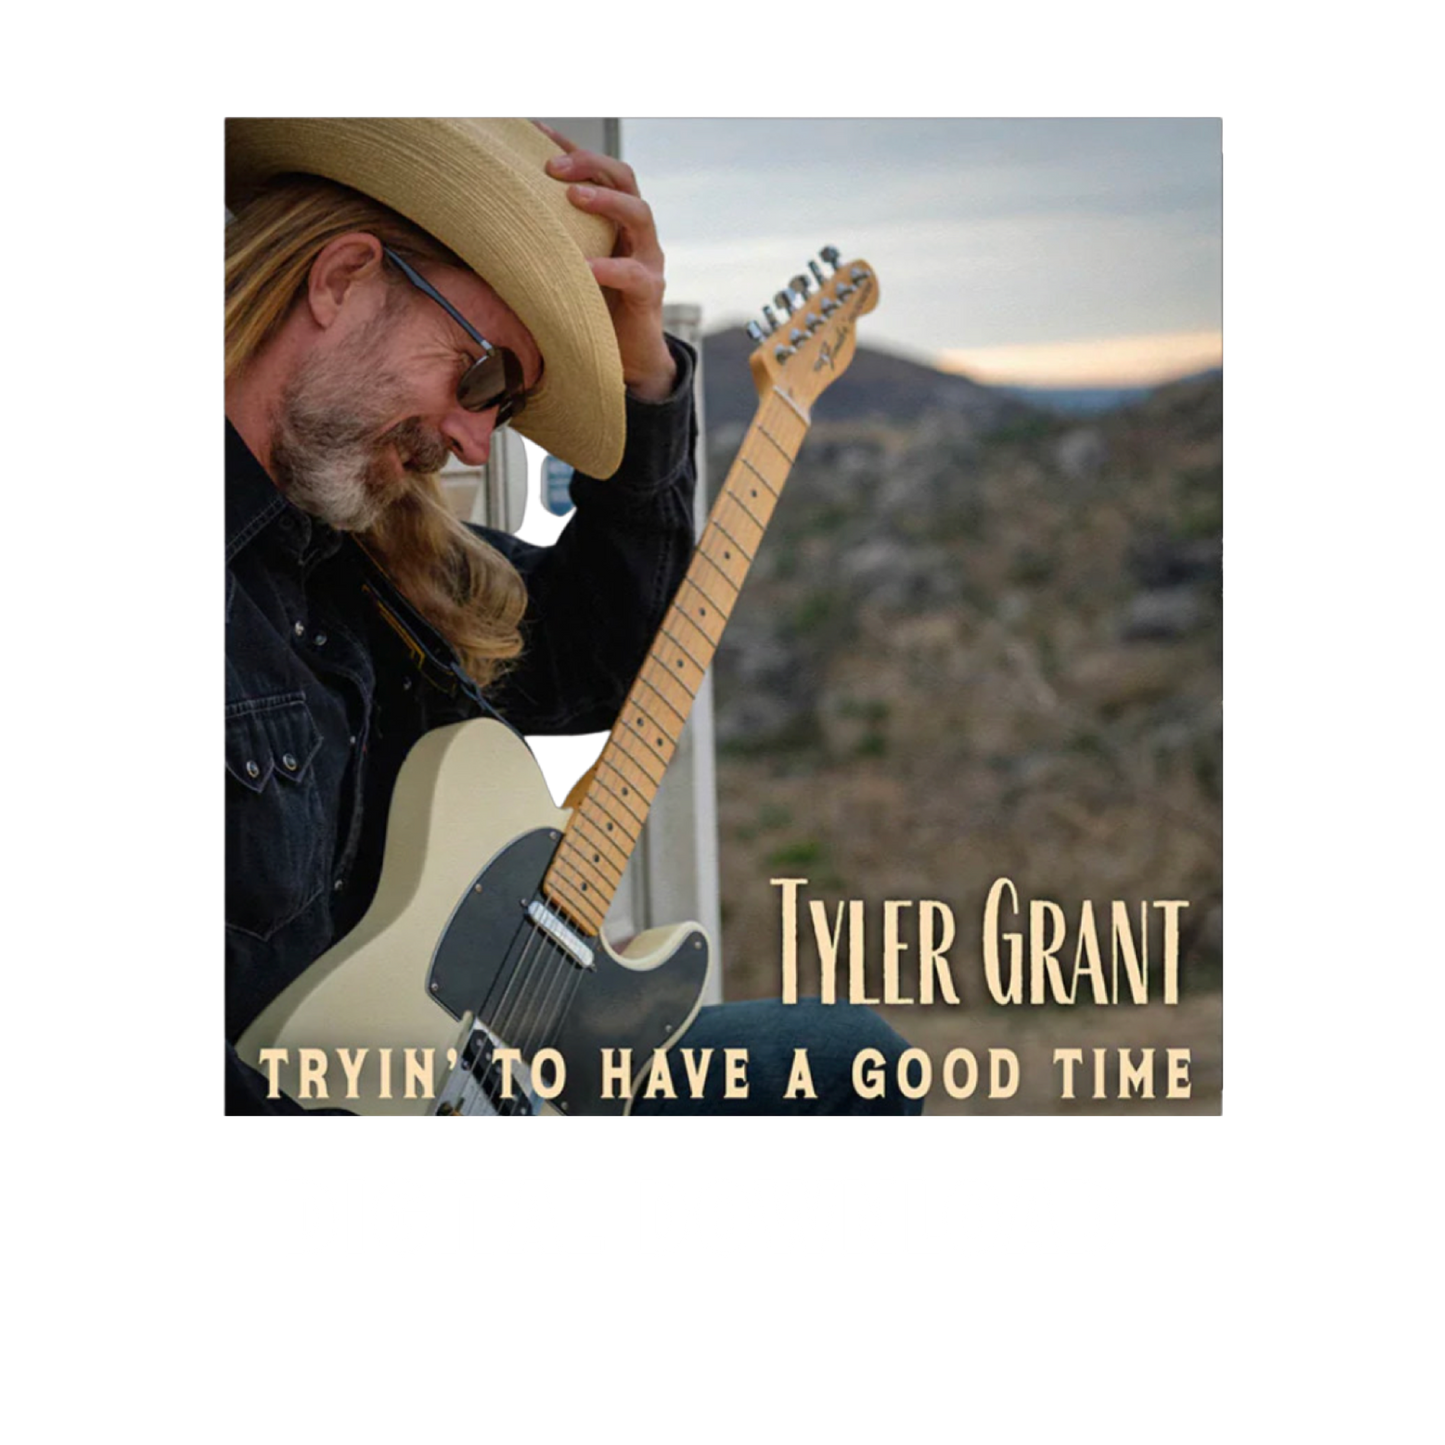 Tyler Grant - Tryin' To Have A Good Time Digital Download